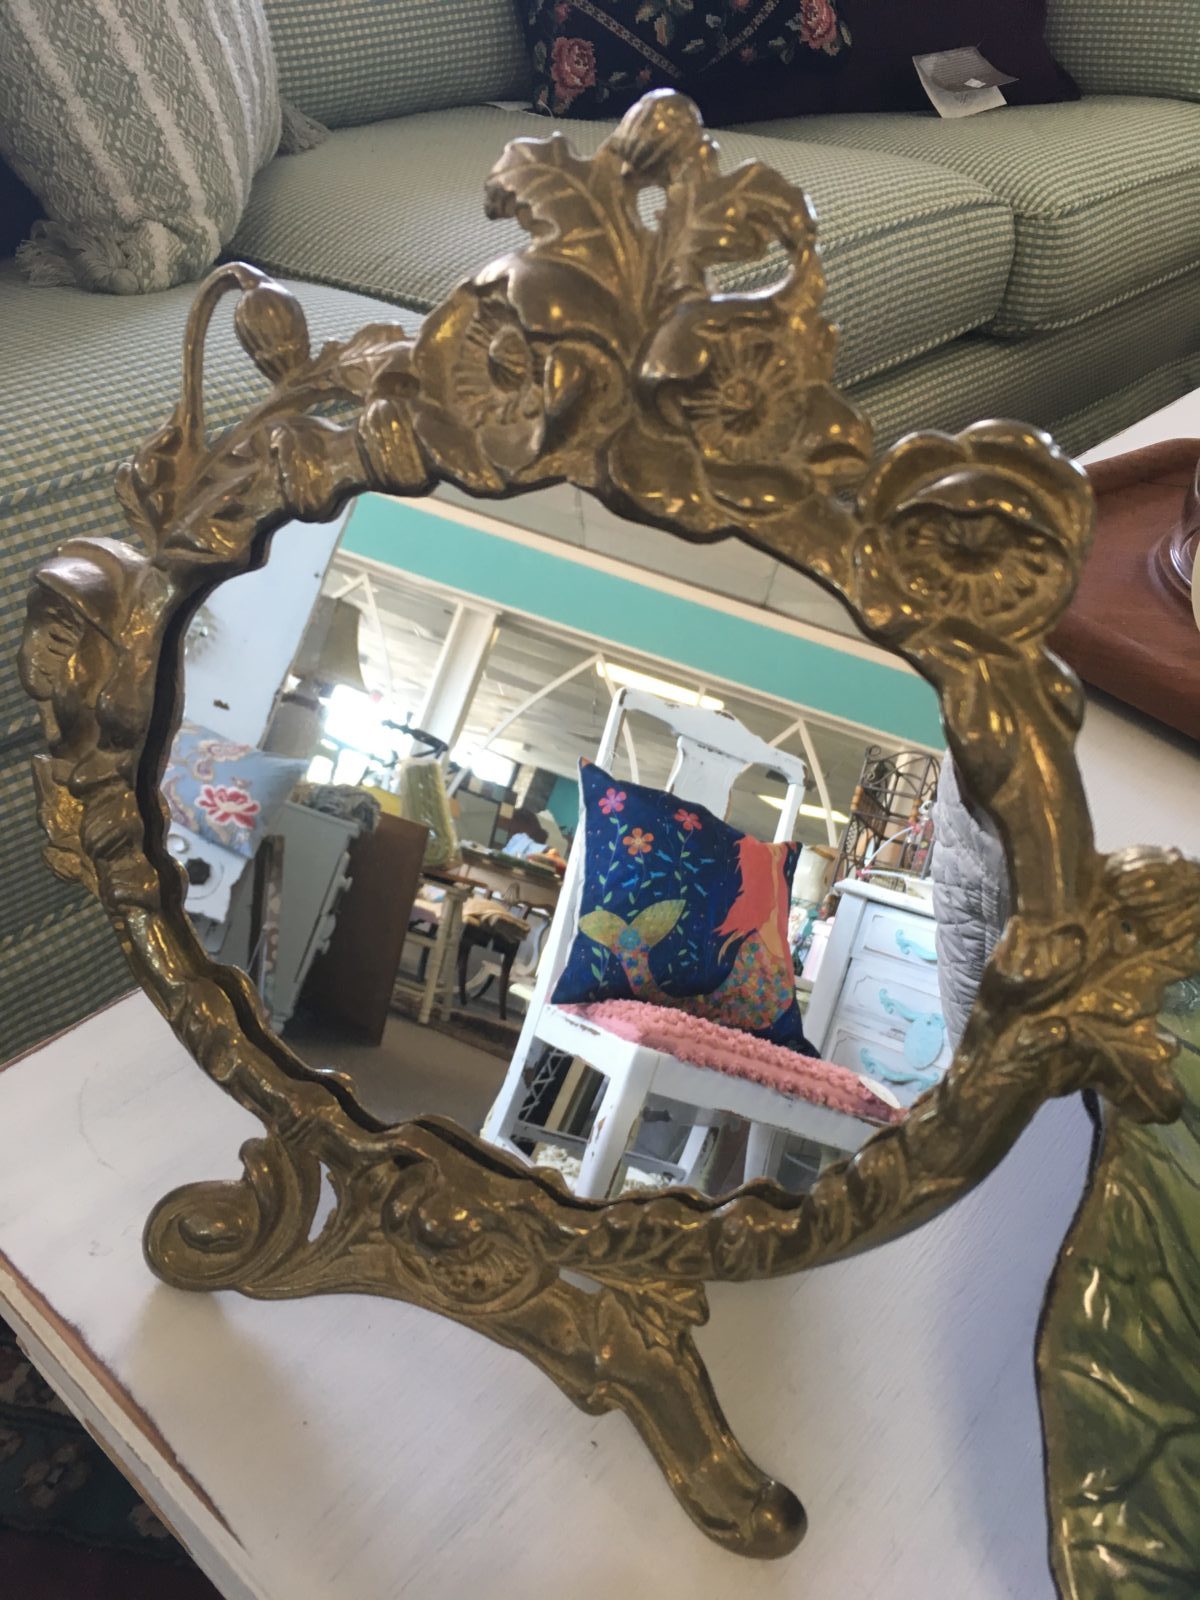 Vintage Brass Vanity Mirror • Vintage brass standing vanity mirror on easel is made of heavy brass with an attractive floral design surrounding the oval shaped mirror. Wonderful, thoughtful gift sure to add a touch of elegance to any table, vanity or bathroom.